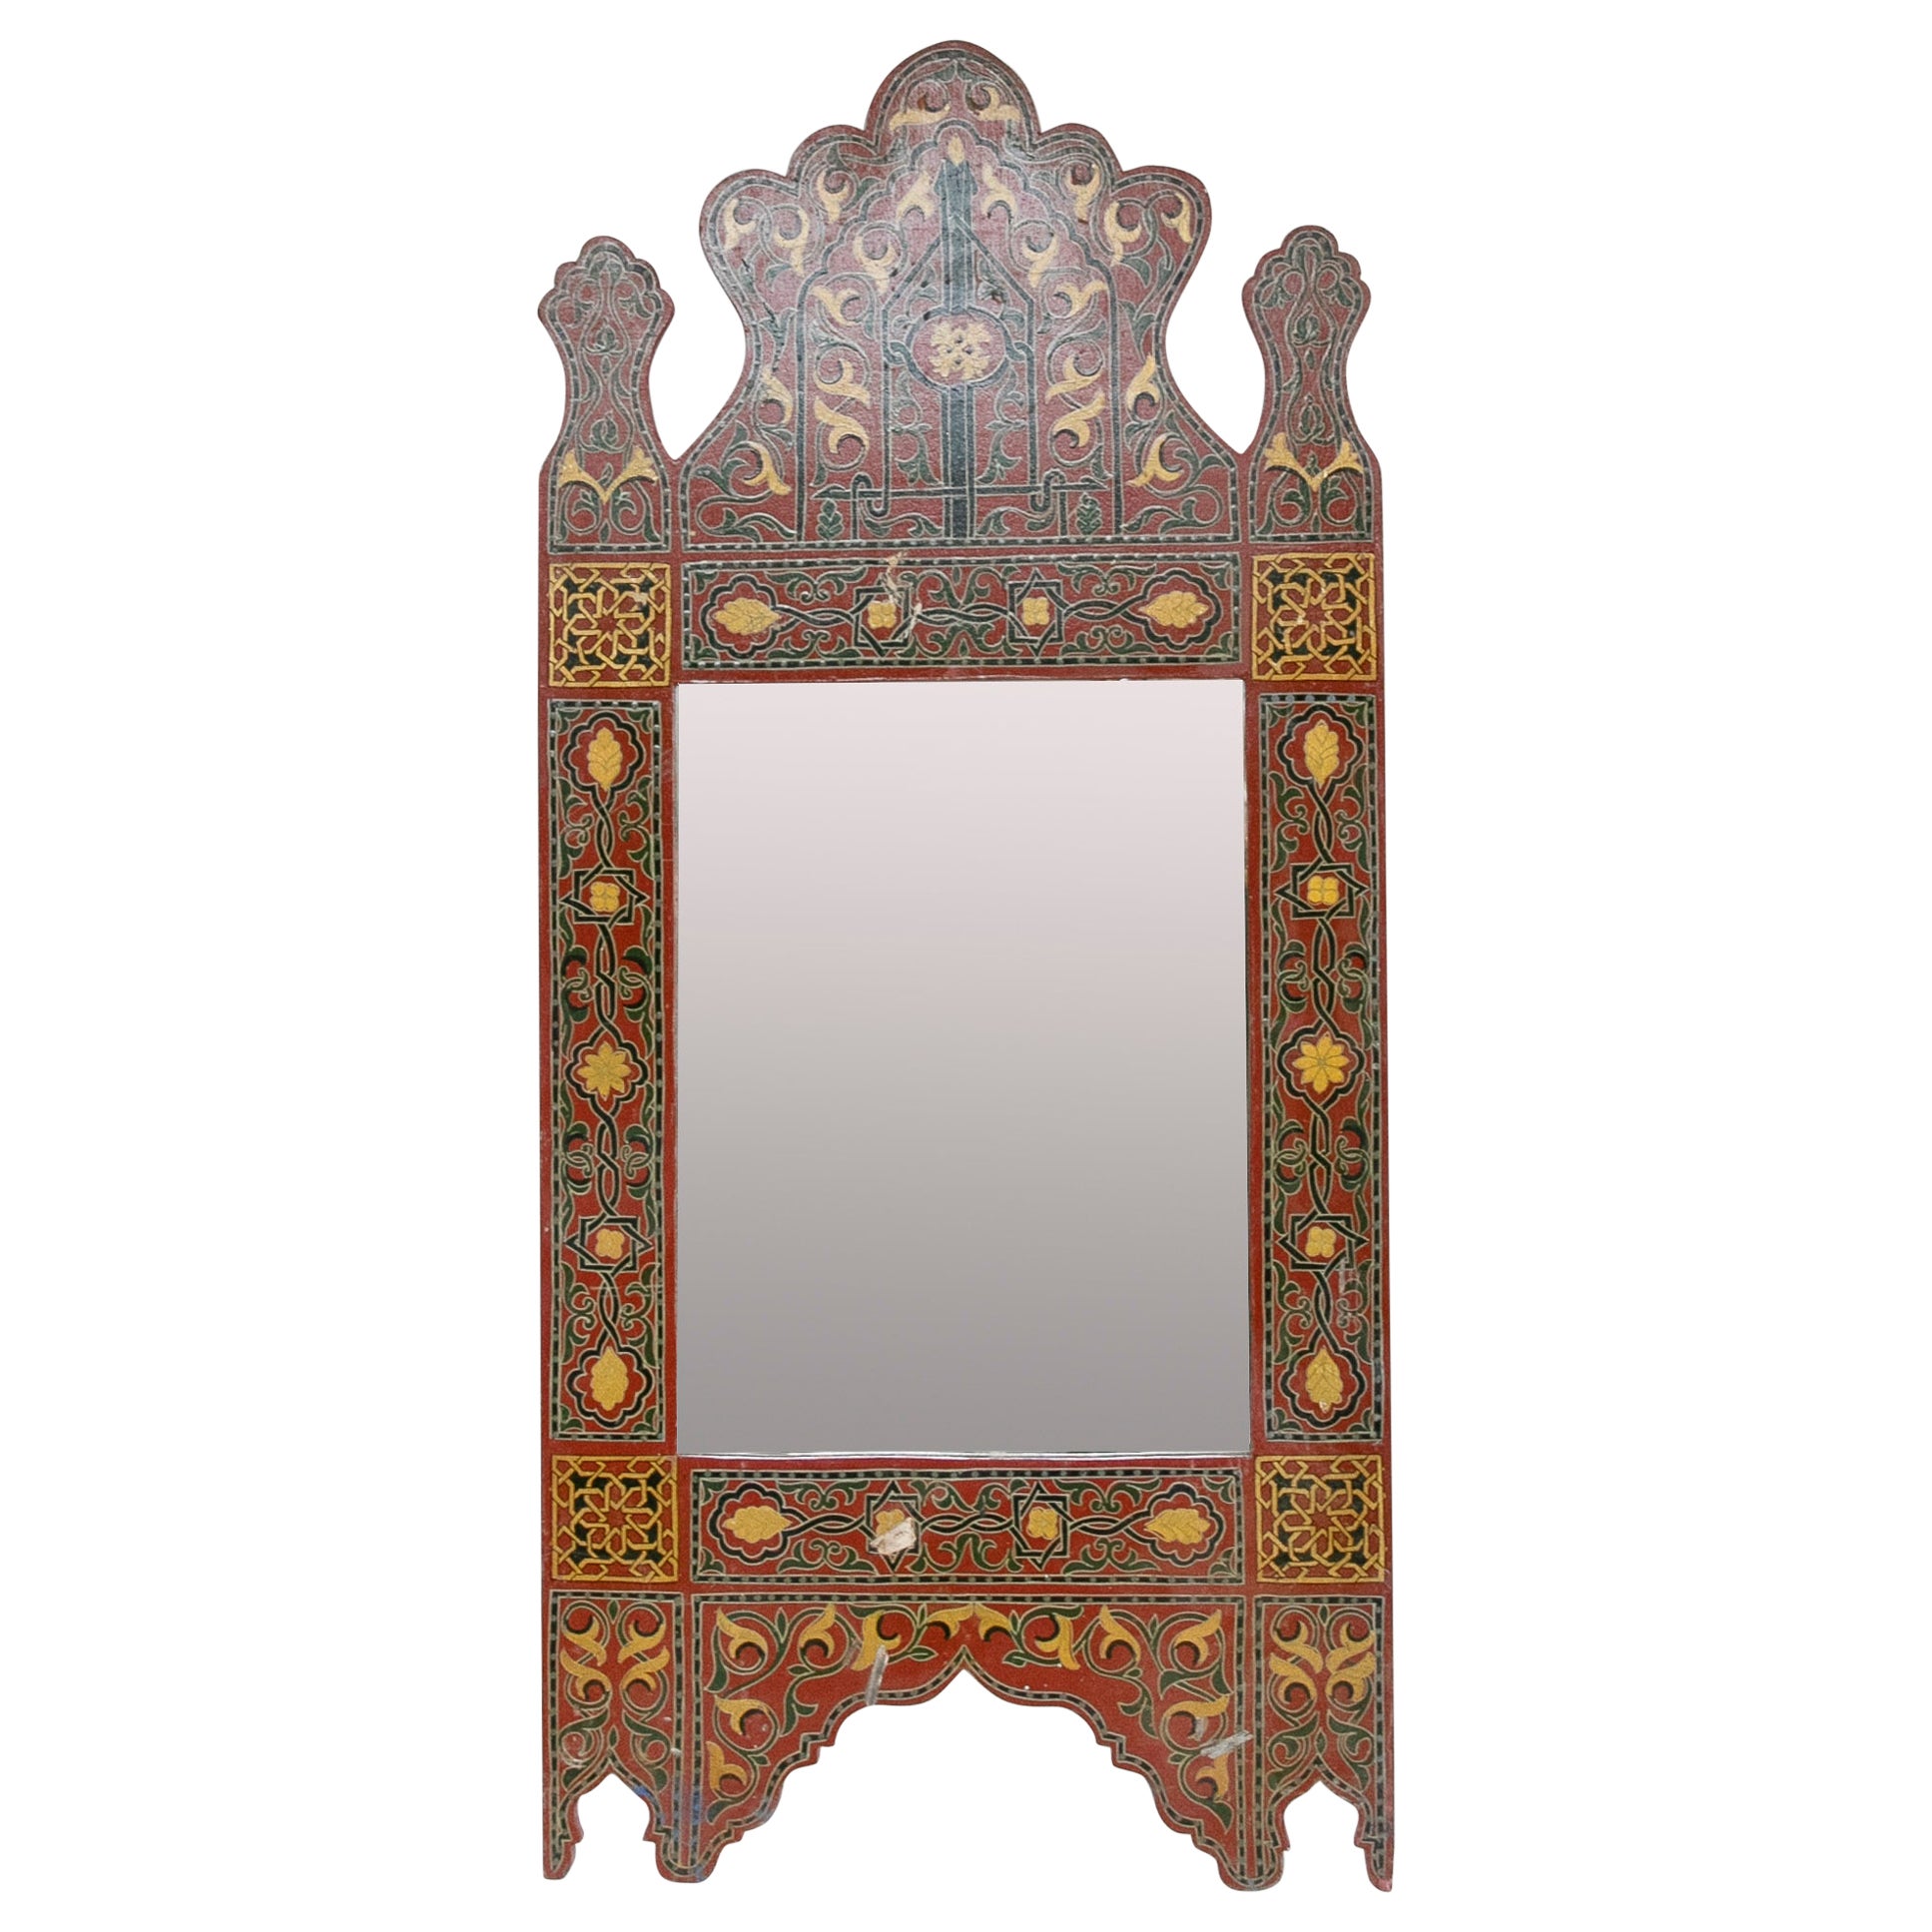 1990s Hand Painted Moroccan Style Wooden Mirror with Arabic Decorations For Sale